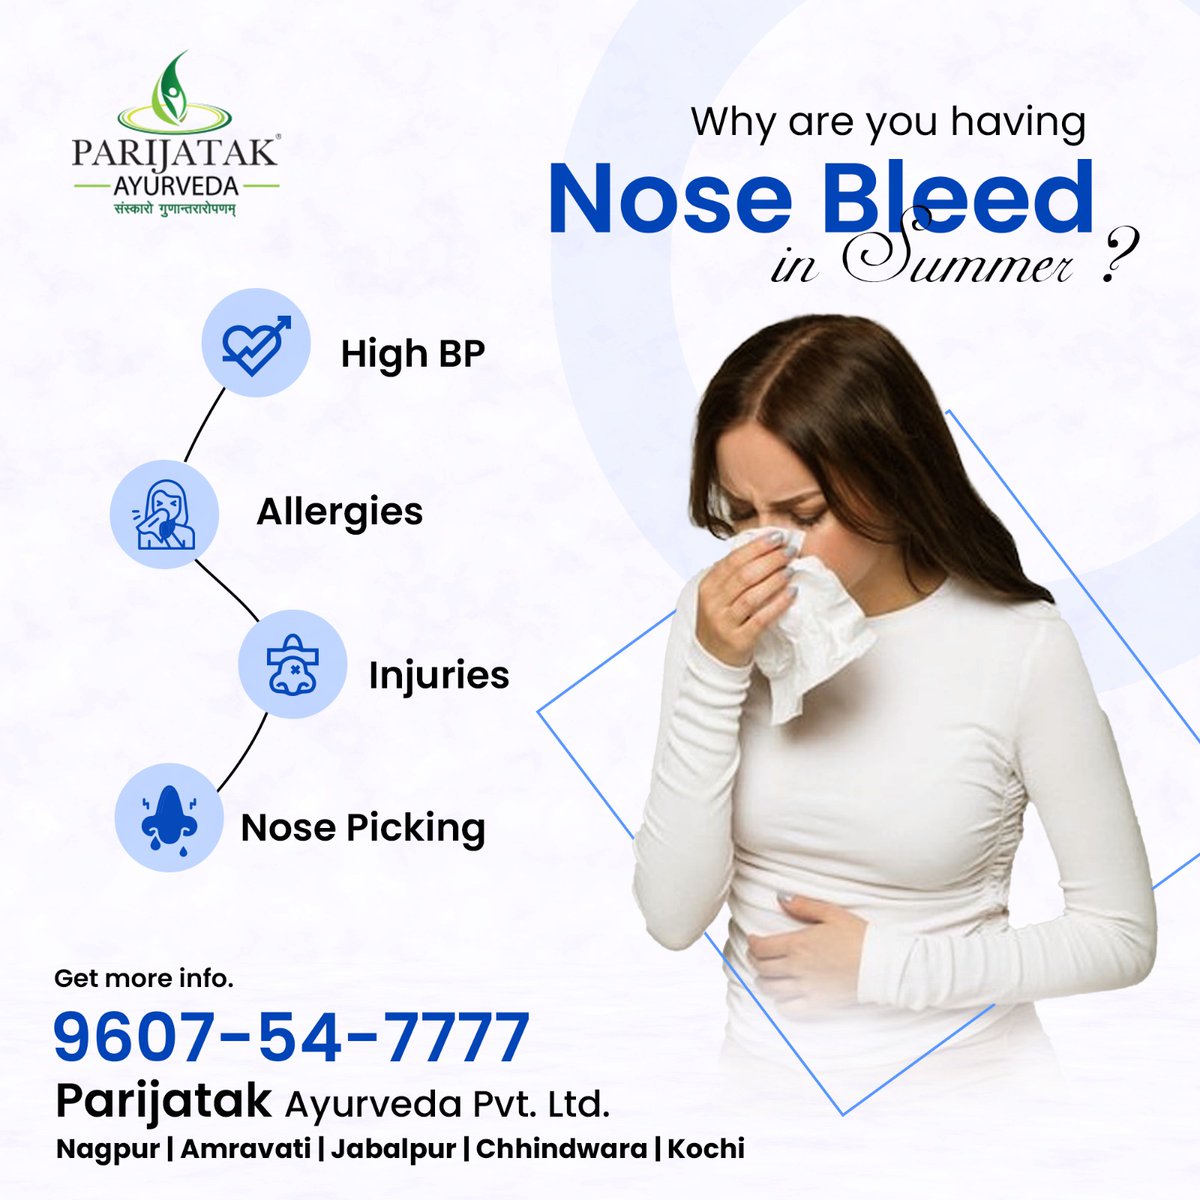 Summer Heat Got You Seeing Red?
Nosebleeds are common during hot weather. But don't worry, Parijatak Ayurveda Clinic can help!

Call Now: +91-9536847777
#ParijatakAyurveda #SummerHealth #NosebleedTreatment #AyurvedicClinic #Nagpur #cooling #summervibes #summercare